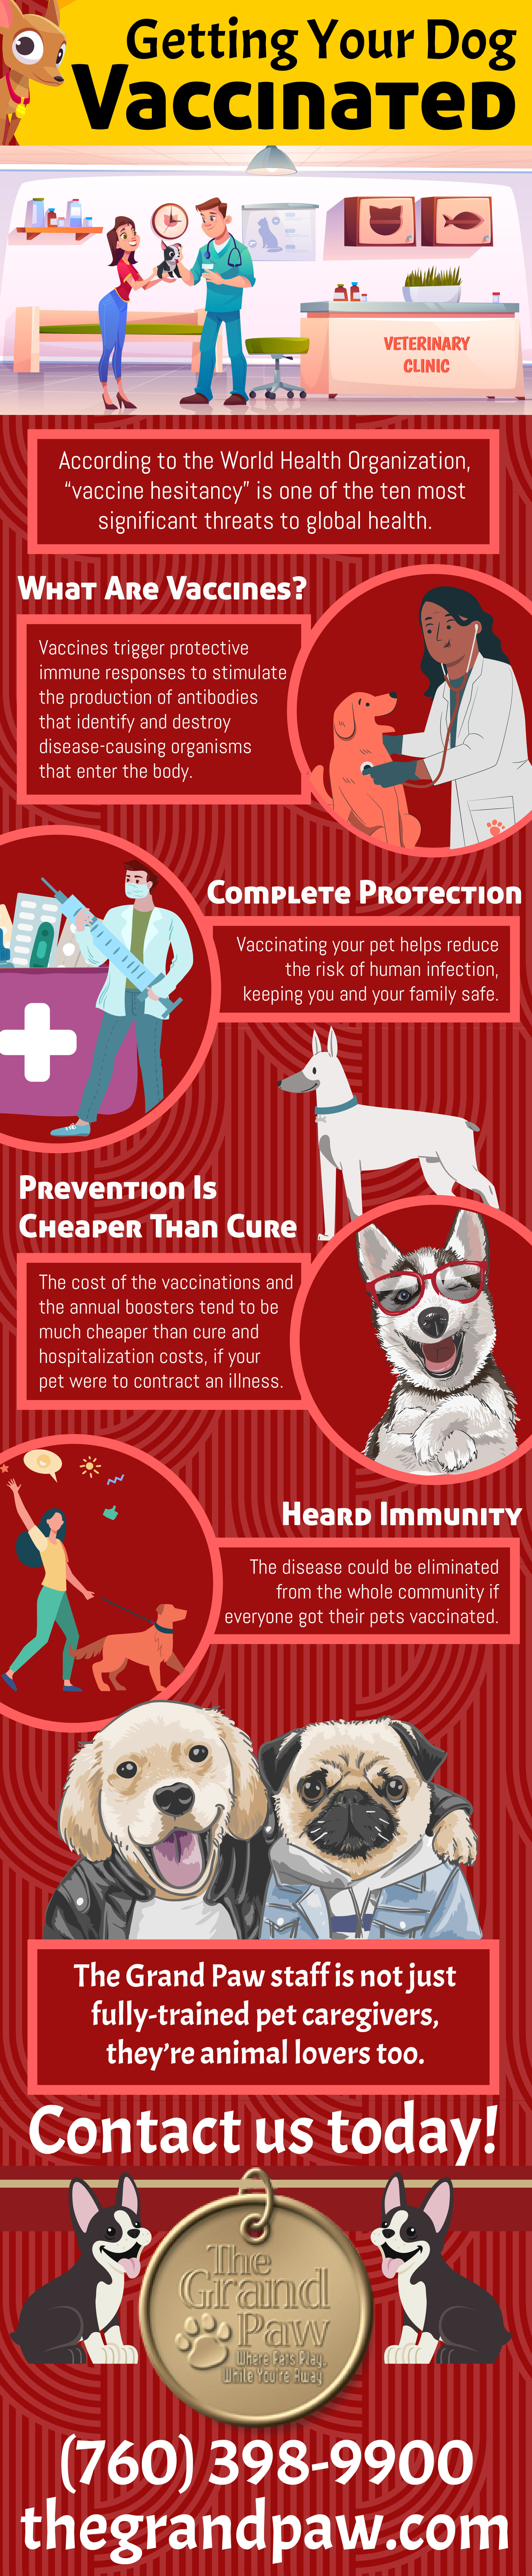 Getting your dog vaccinated